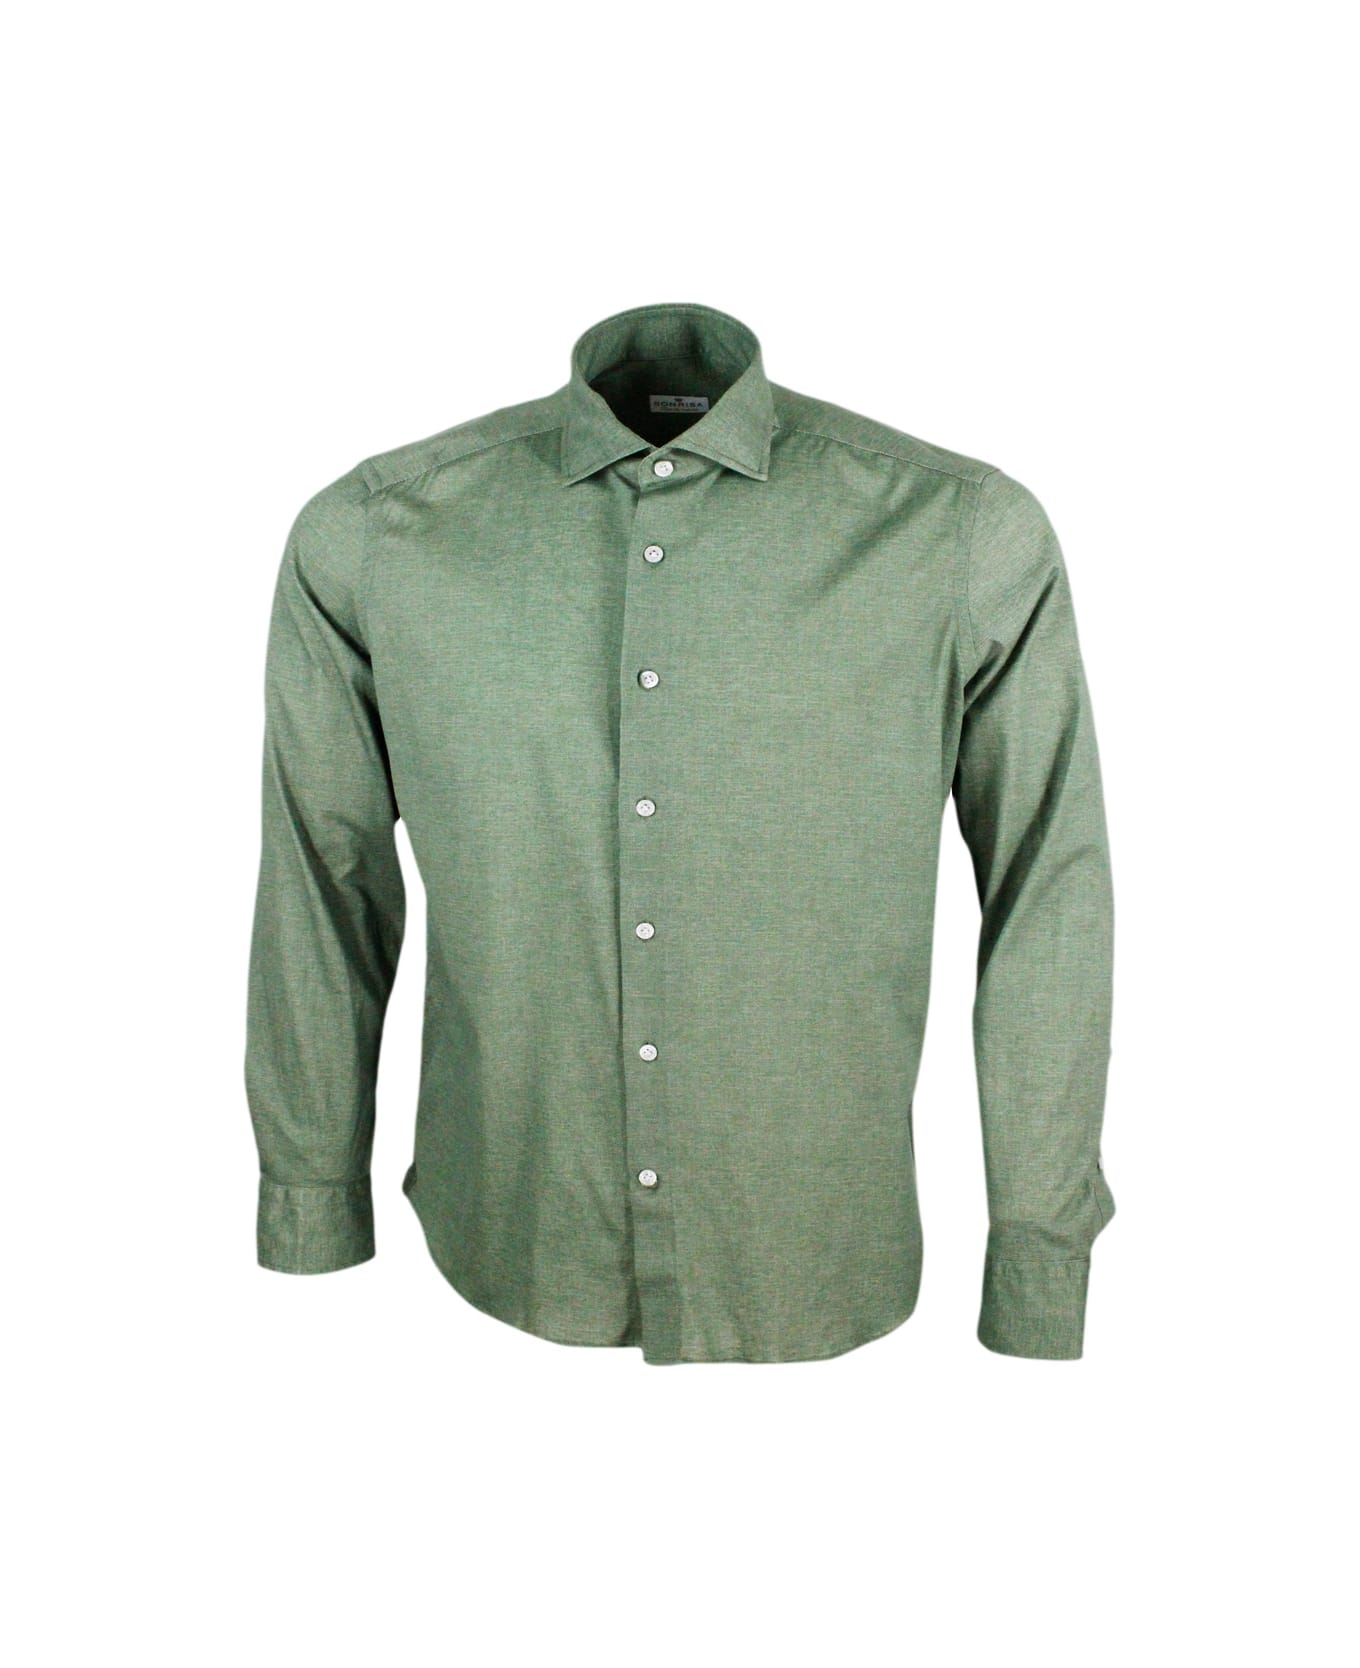 Sonrisa Luxury Shirt In Soft, Precious And Very Fine Stretch Cotton Flower With French Collar In Two-tone Melange Print - Green シャツ